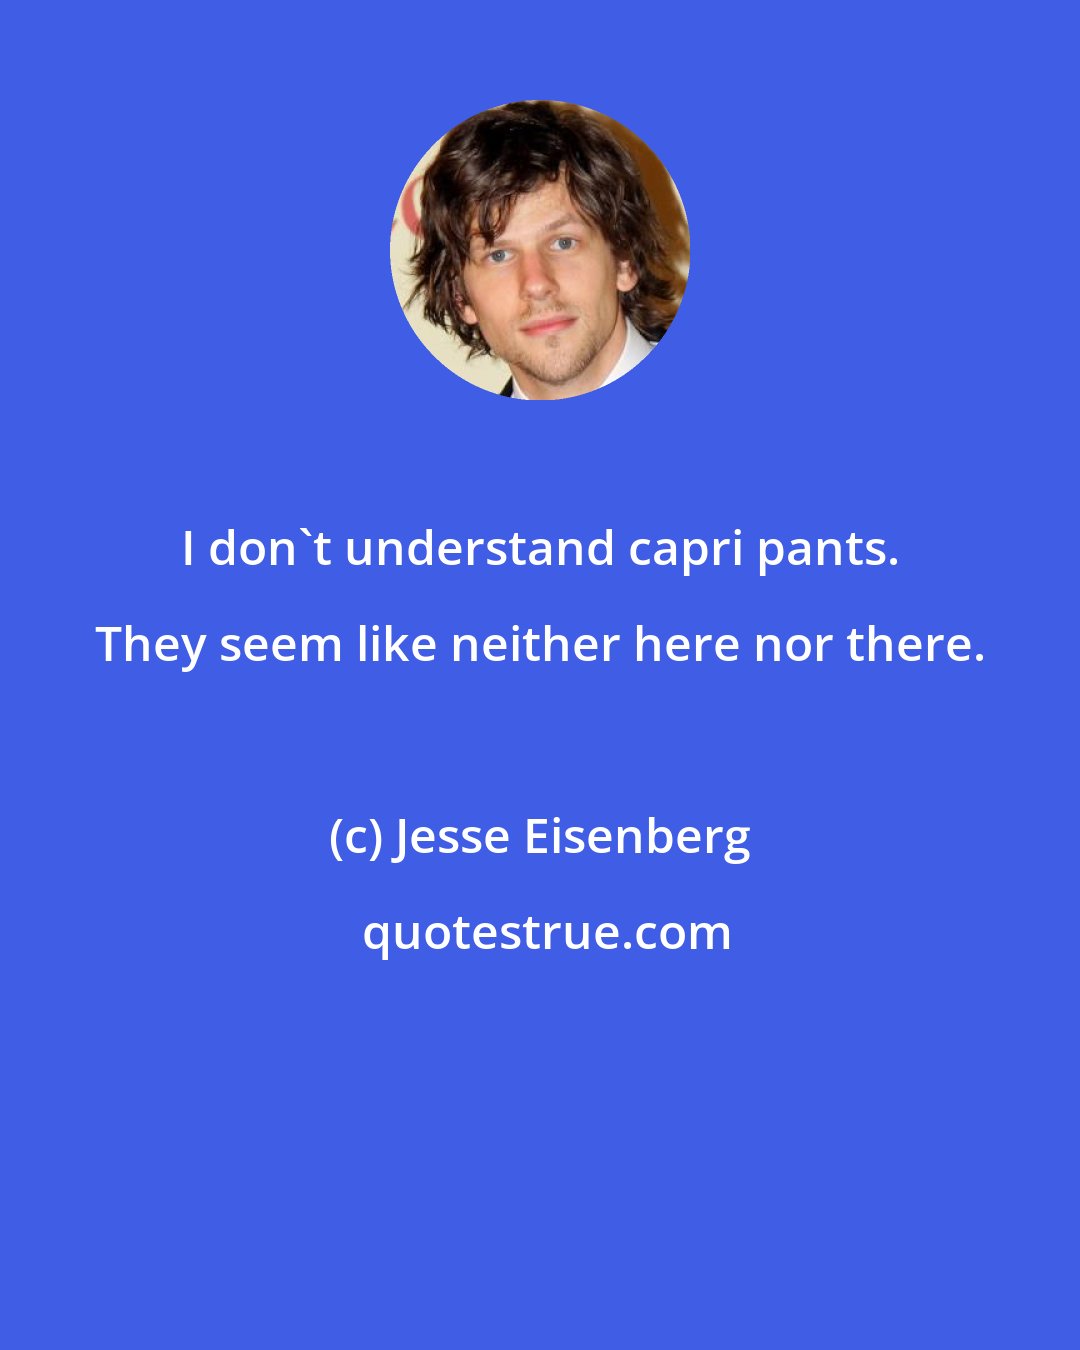 Jesse Eisenberg: I don't understand capri pants. They seem like neither here nor there.